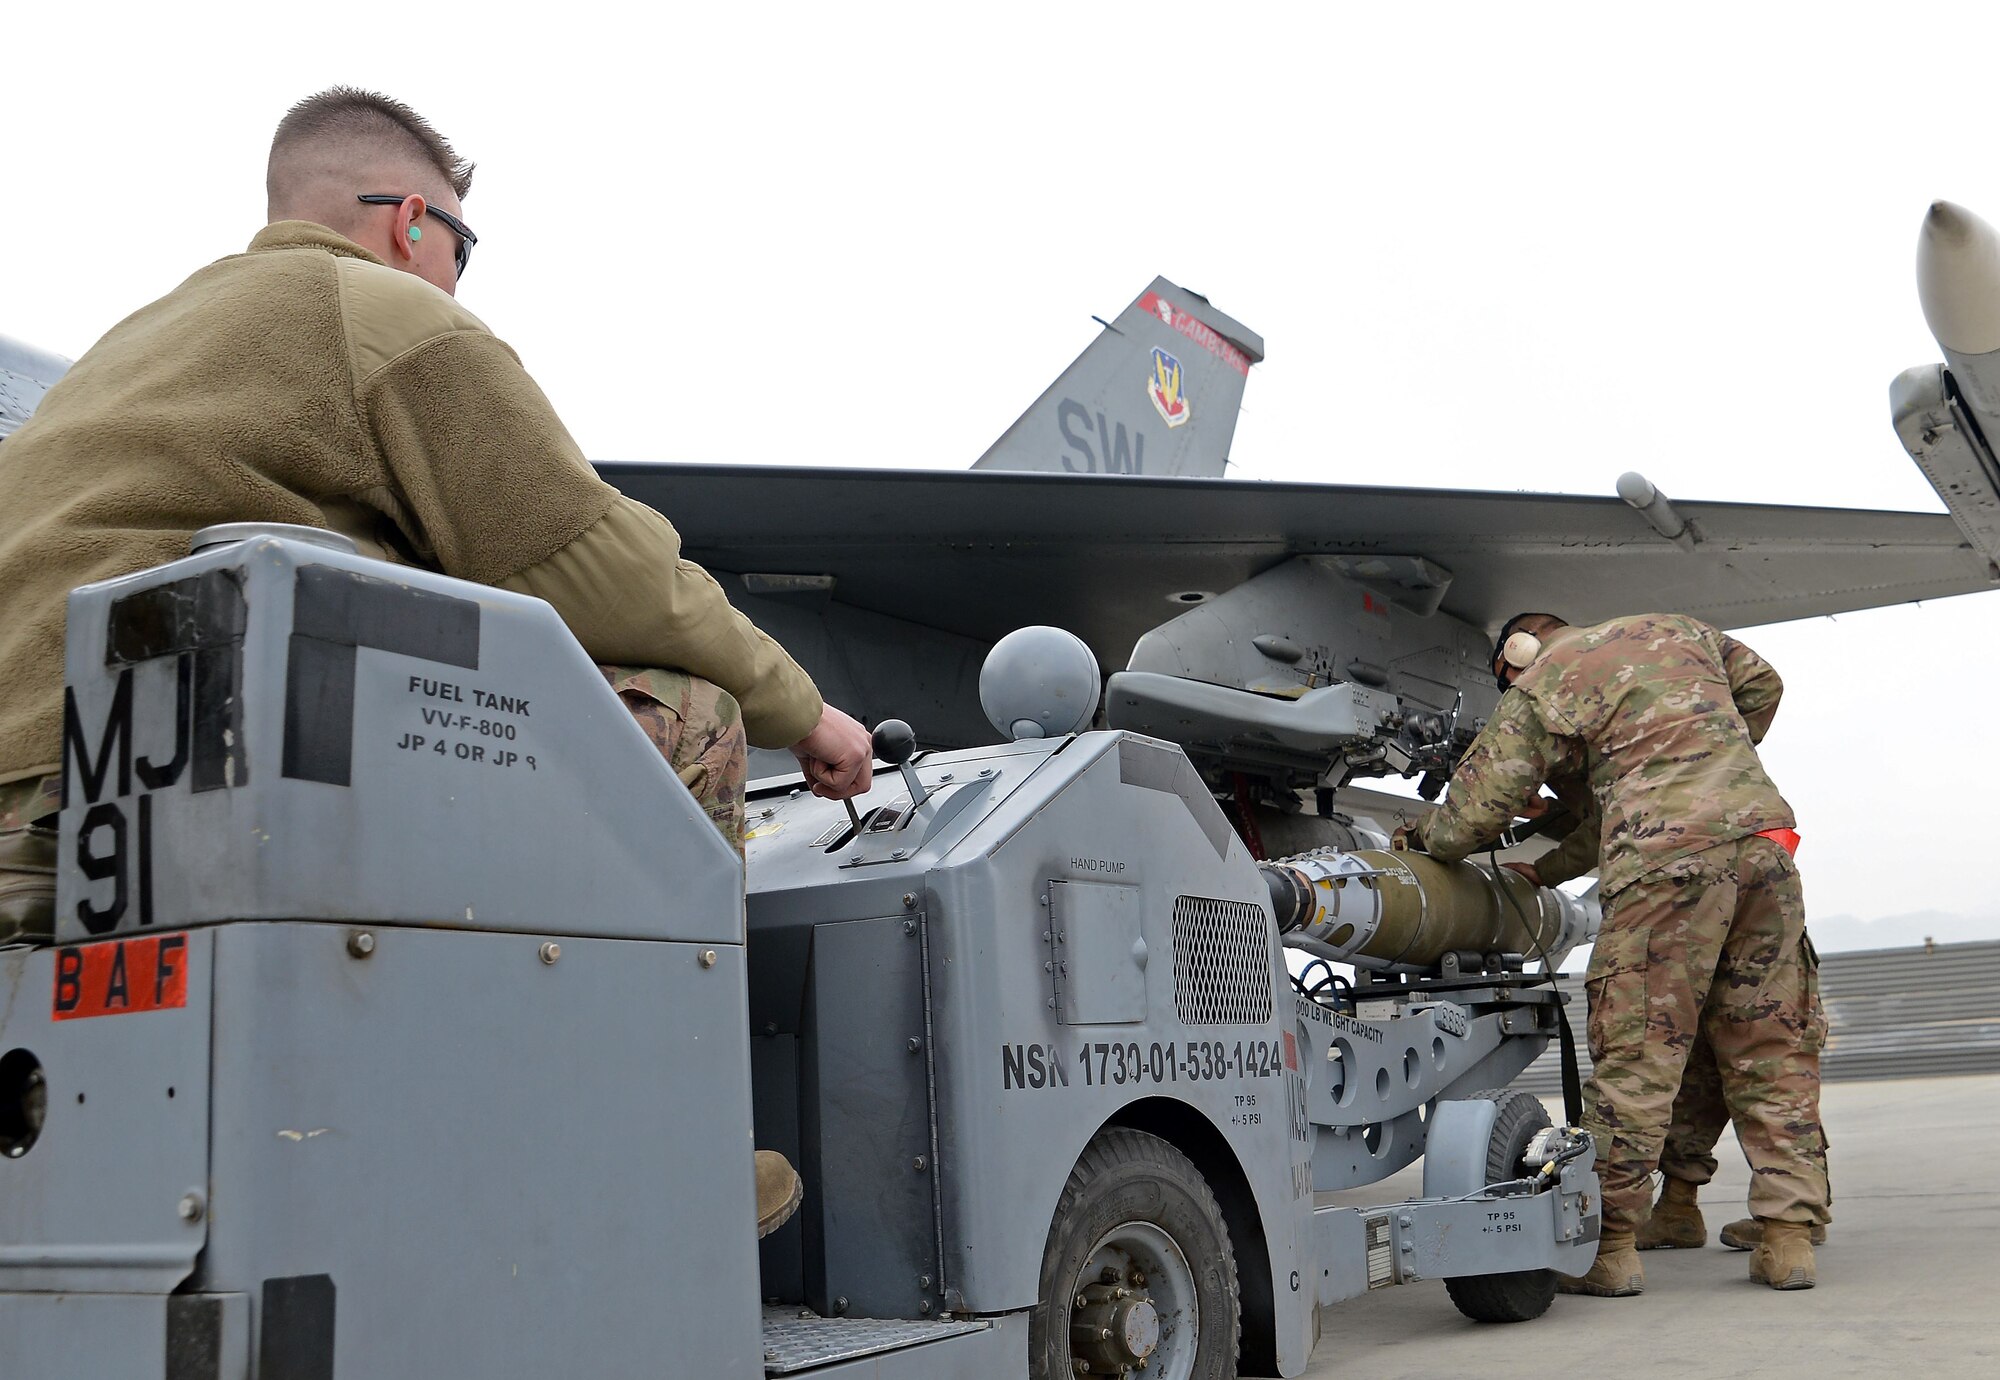 Senior Airman Kaleb Linn, 455th Expeditionary Aircraft Maintenance Squadron weapons load crew member, loads a munition onto an F-16 Fighting Falcon using a jammer Jan. 4, 2018 at Bagram Airfield, Afghanistan.